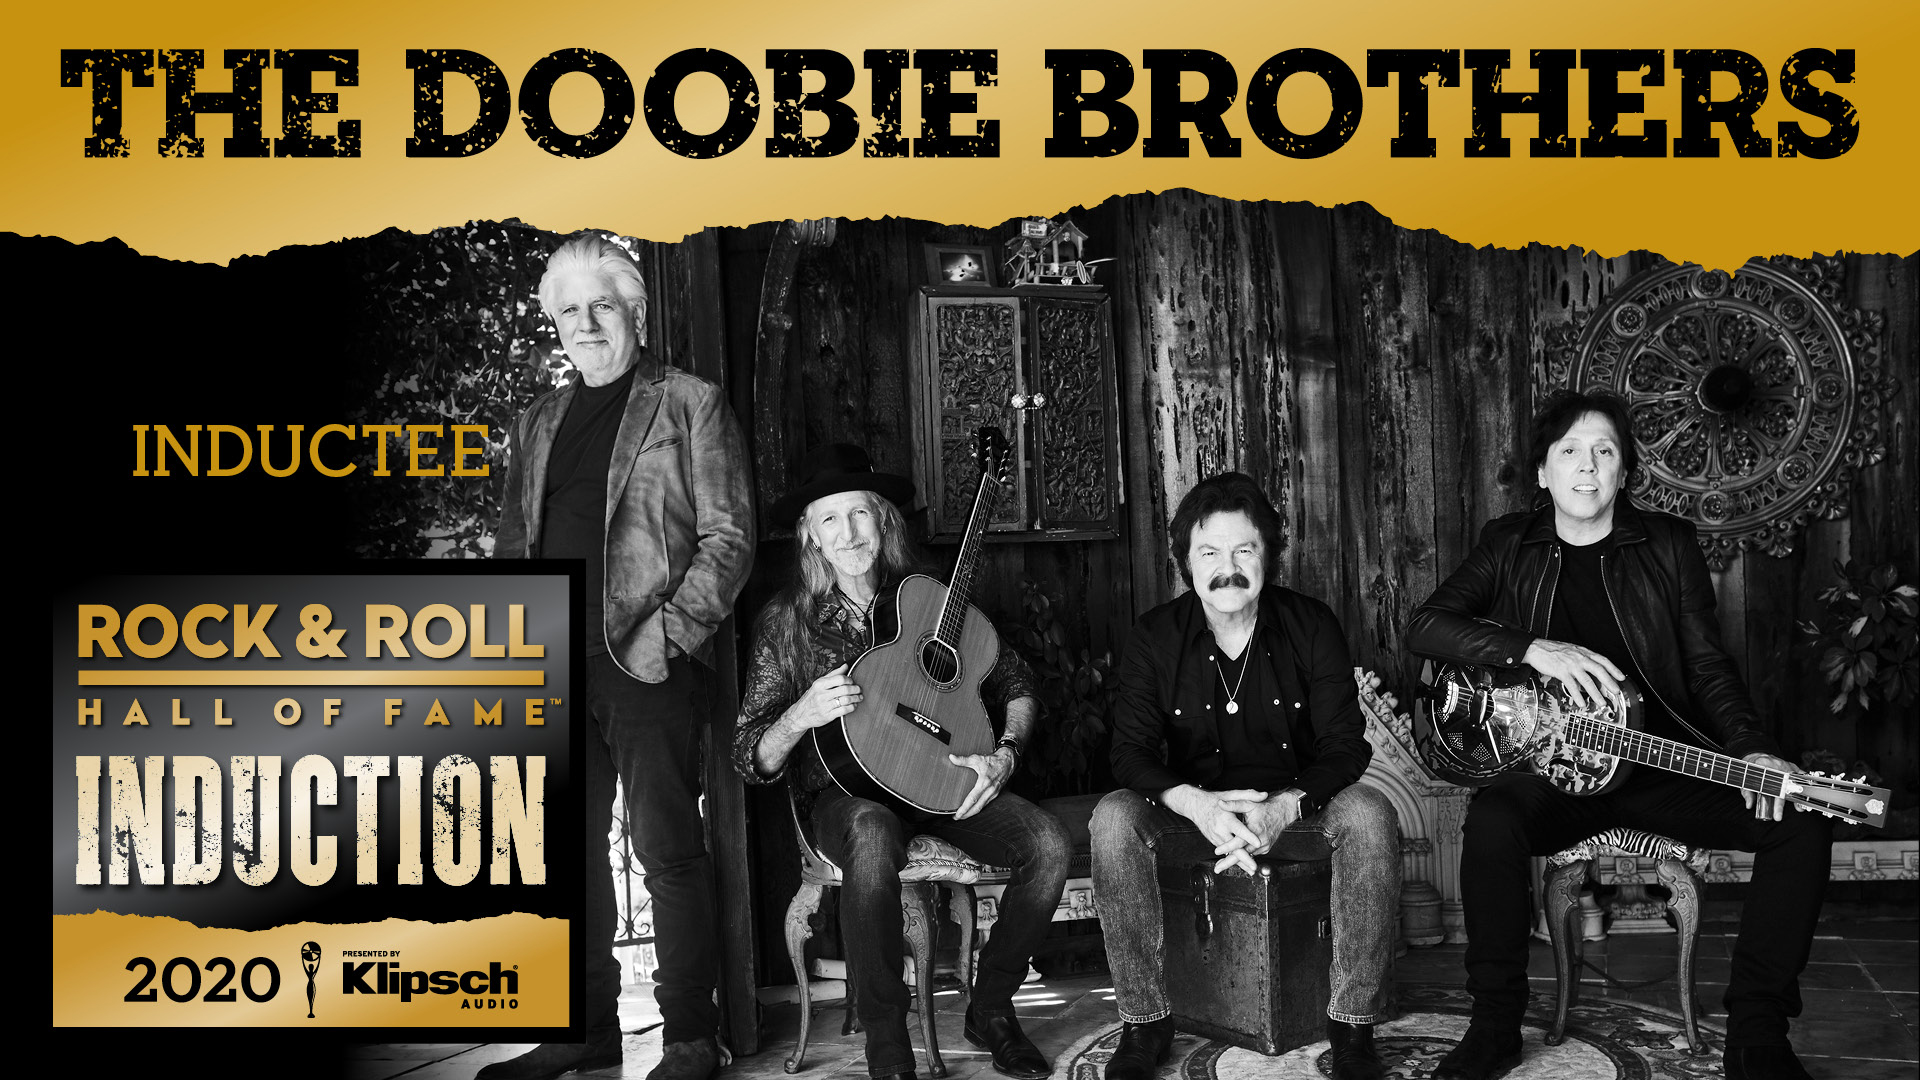 The Doobie Brothers on X: "Congratulations to The Doobie Brothers on their  induction into the @RockHall of Fame! Thanks to all who voted and made it  possible. https://t.co/nhwGYKG4ZX" / X